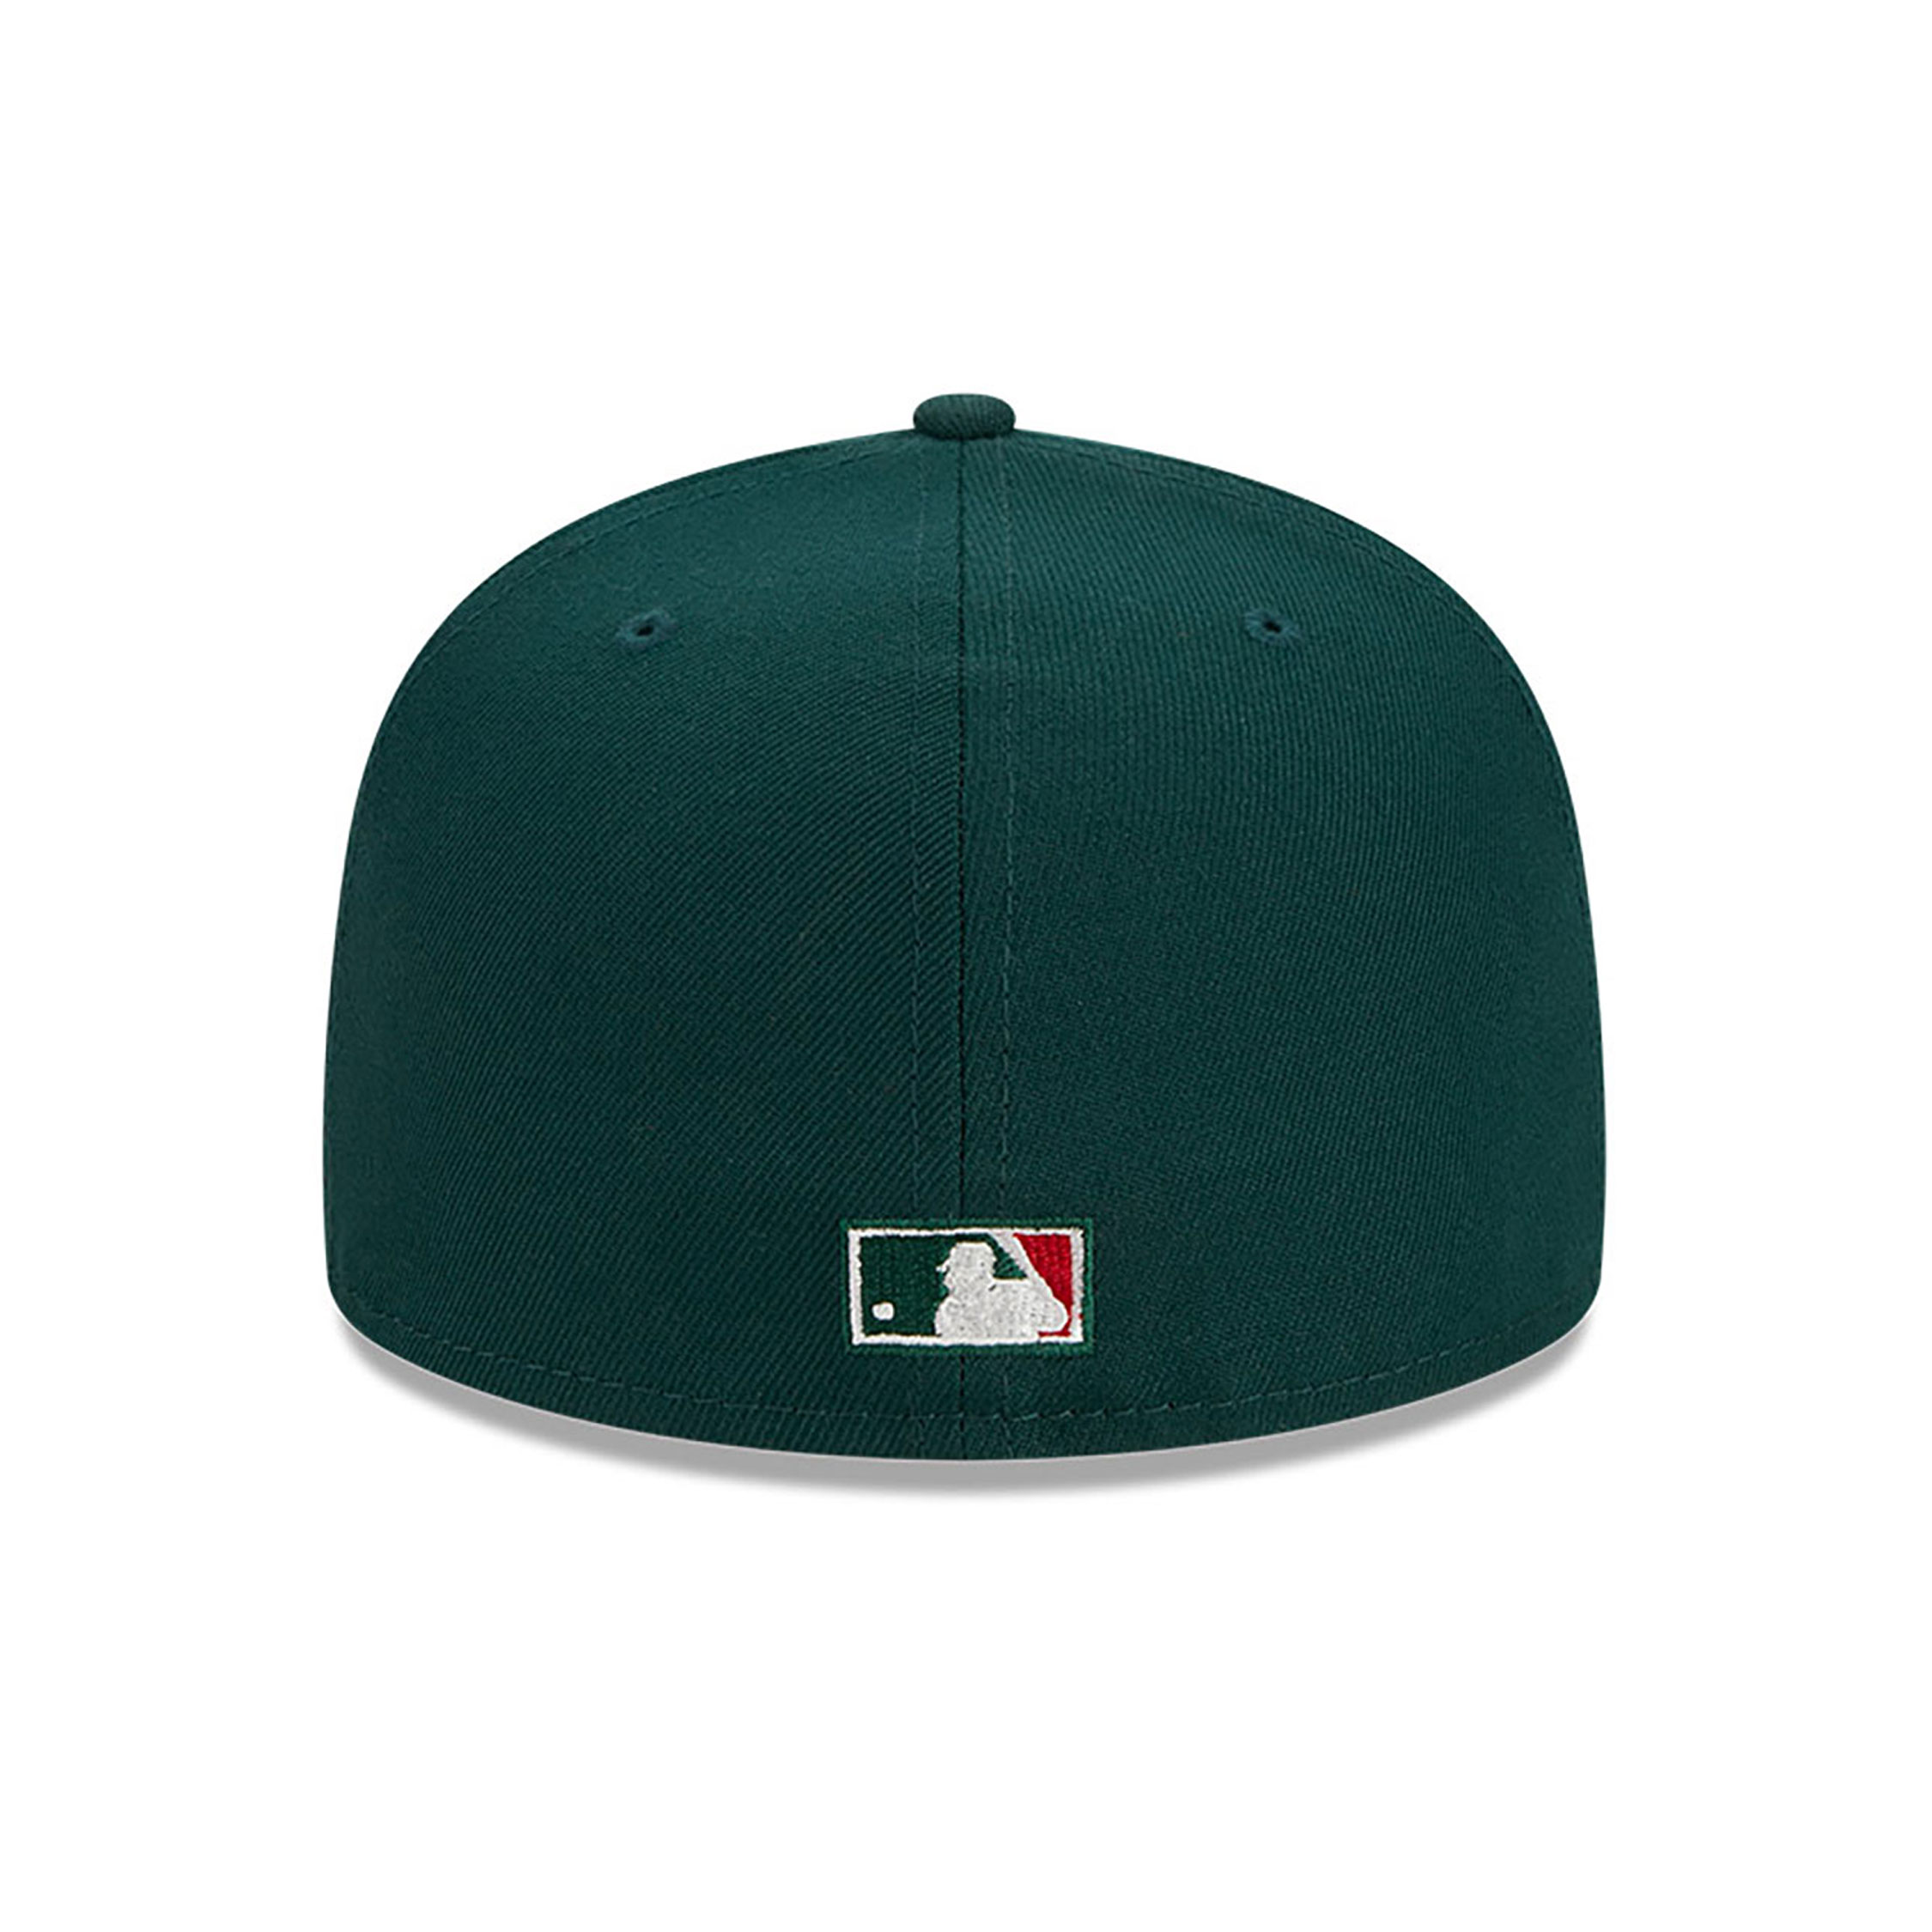 Oakland Athletics Spice Berry Dark Green 59FIFTY Fitted Cap